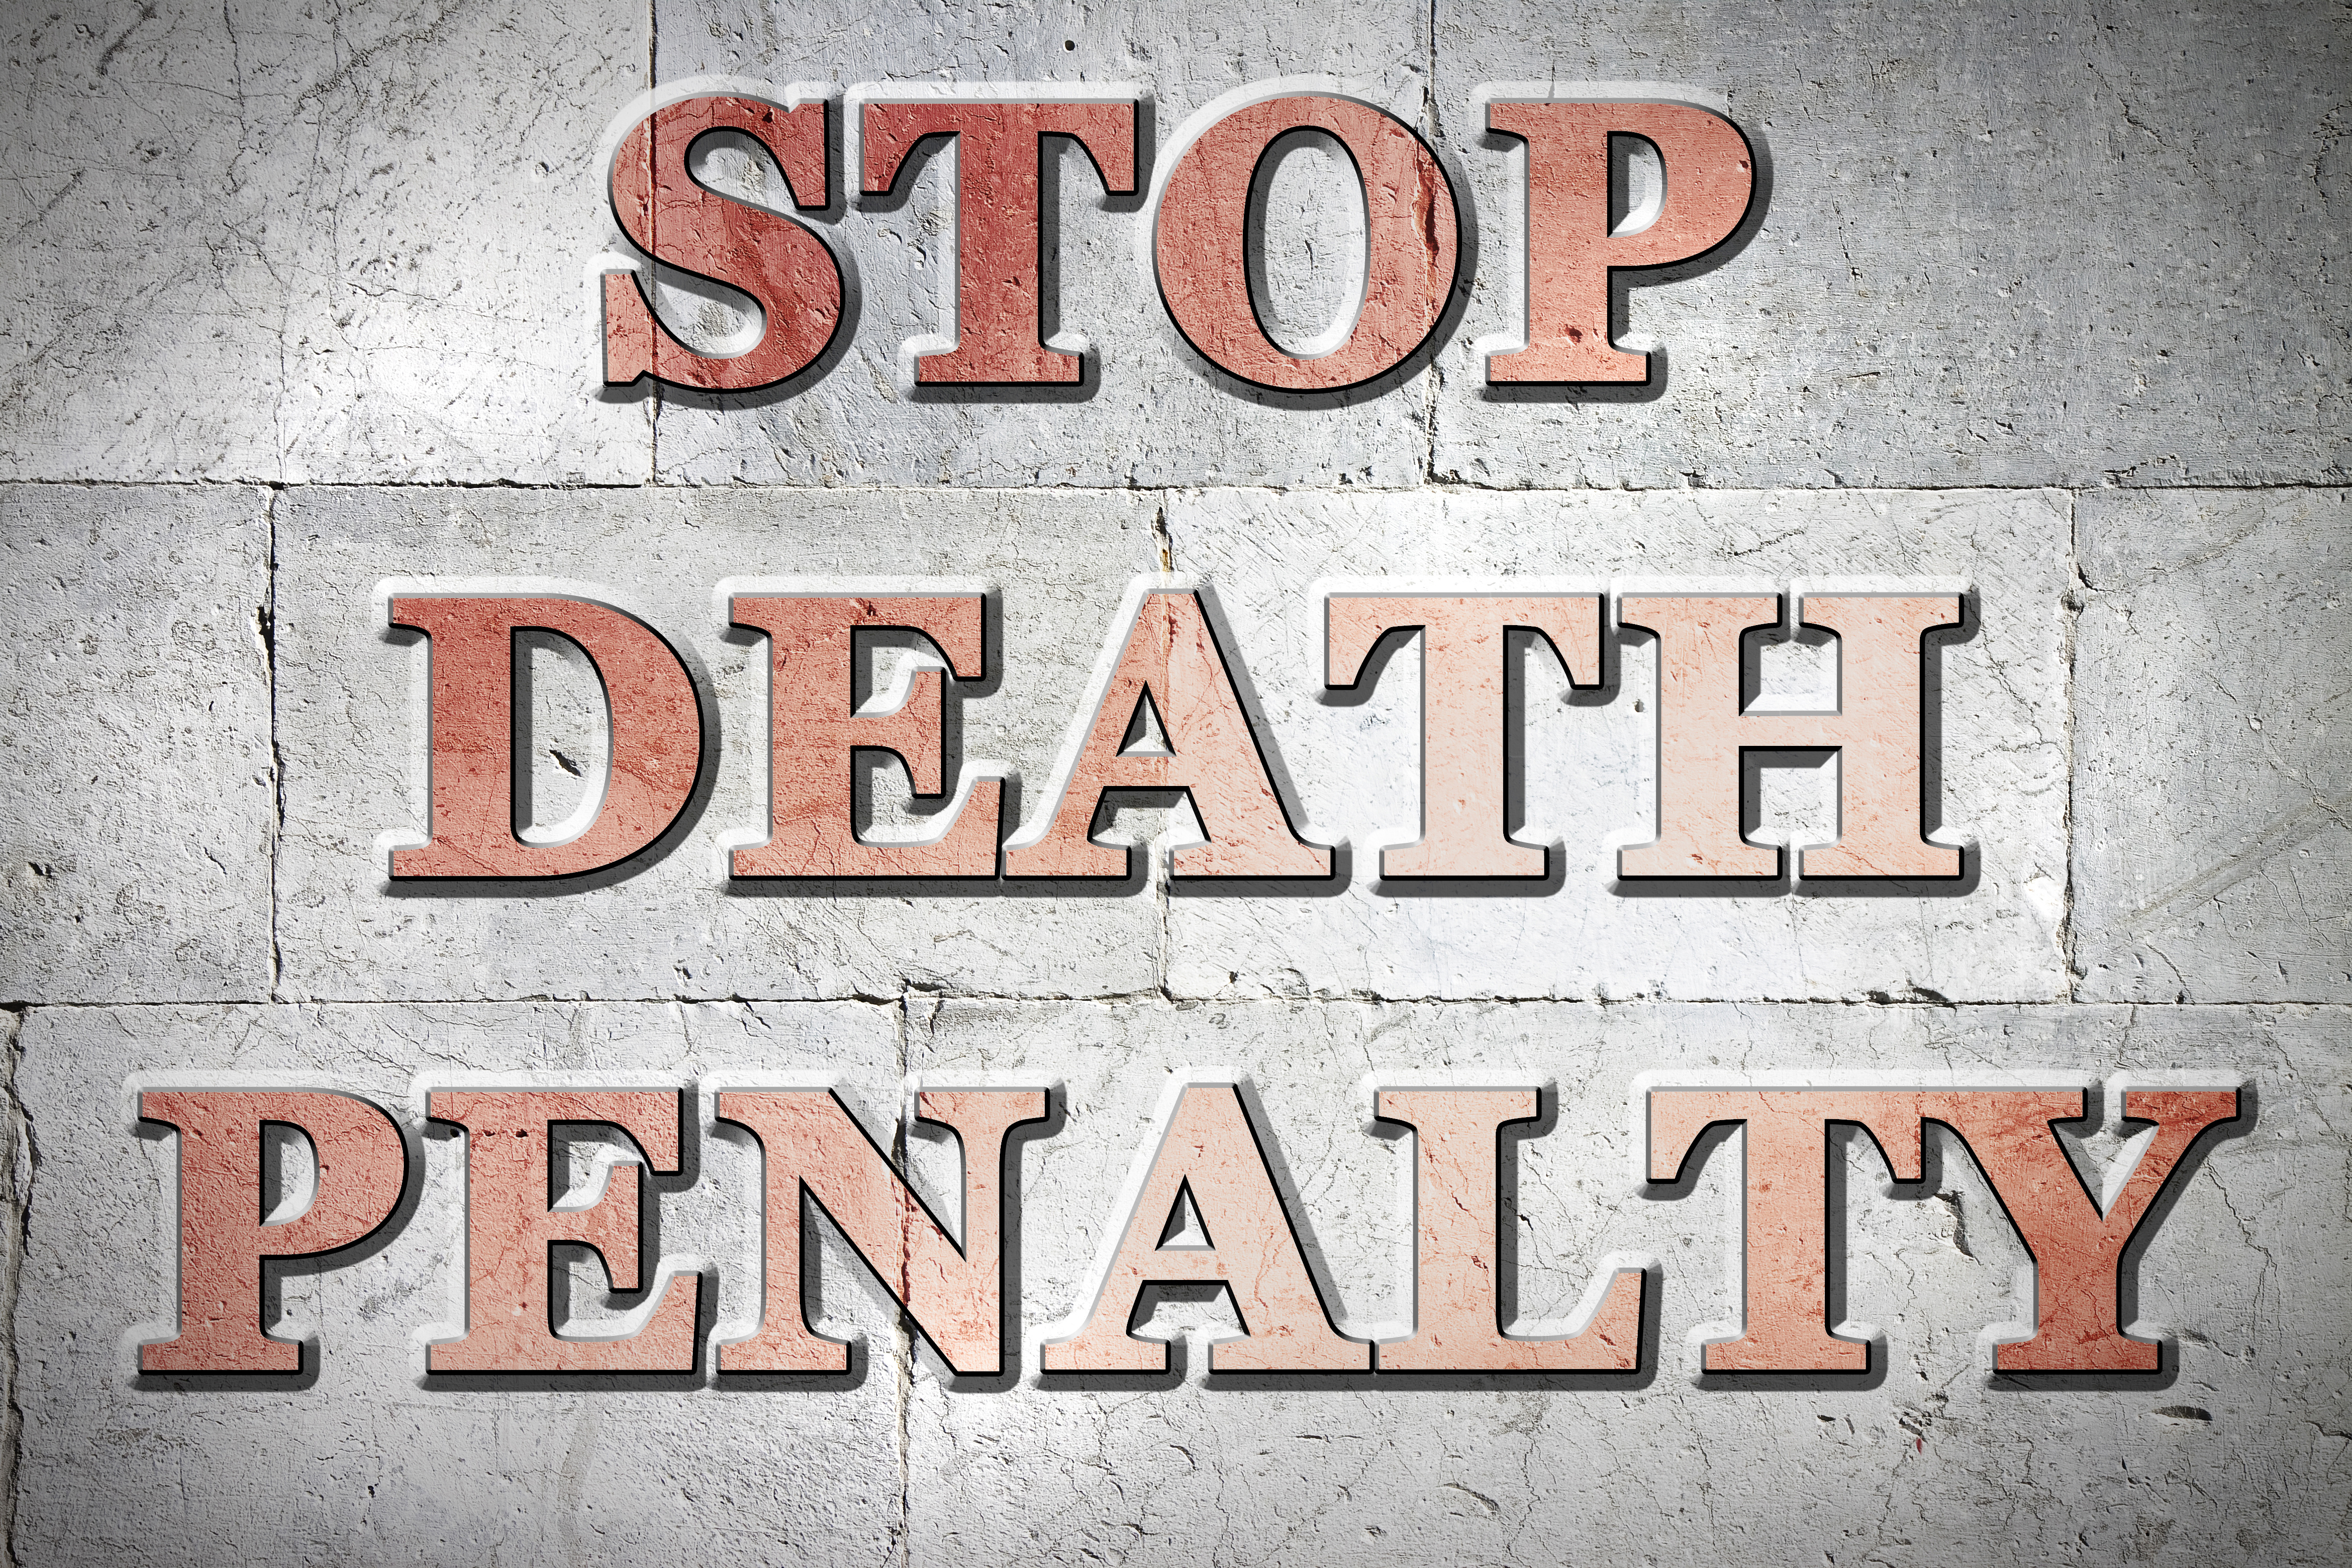 Stop death penalty engraved on a stone wall - concept image